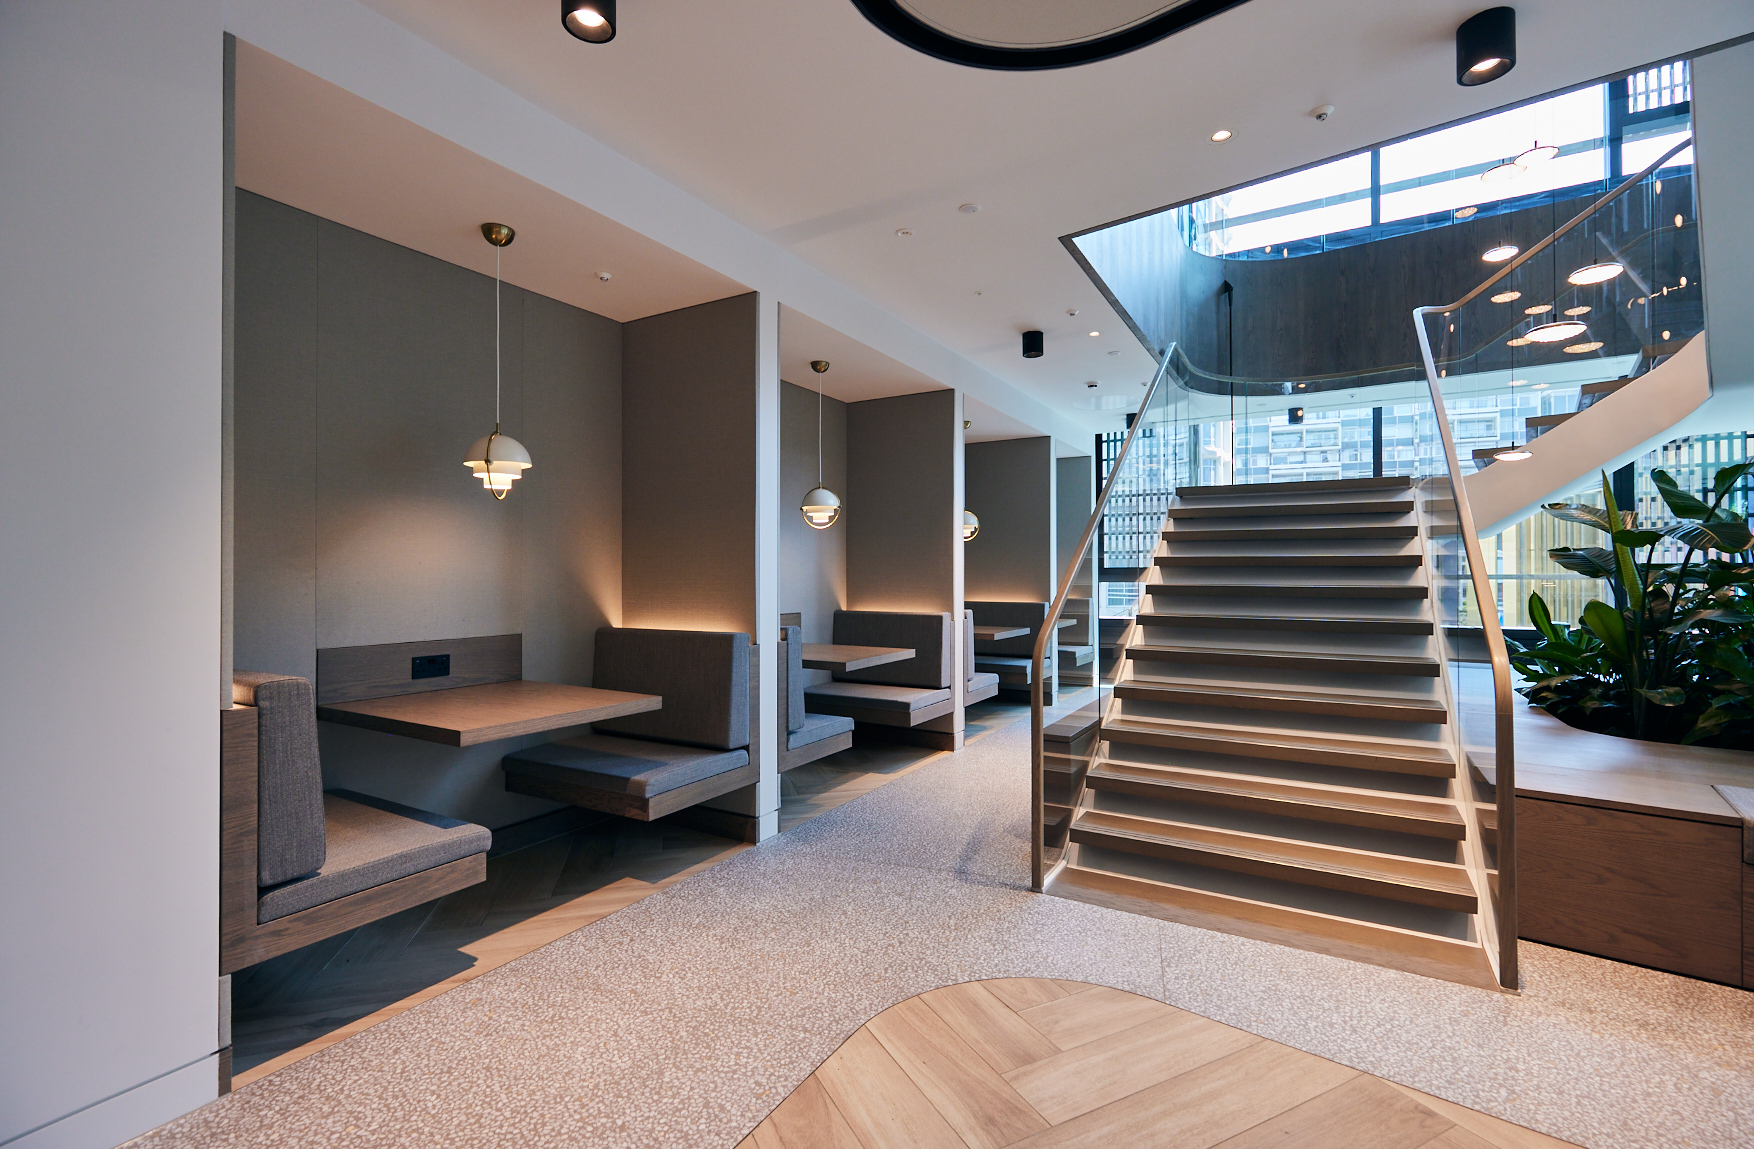 Apollo Global - Office Flooring - Loughton Contracts